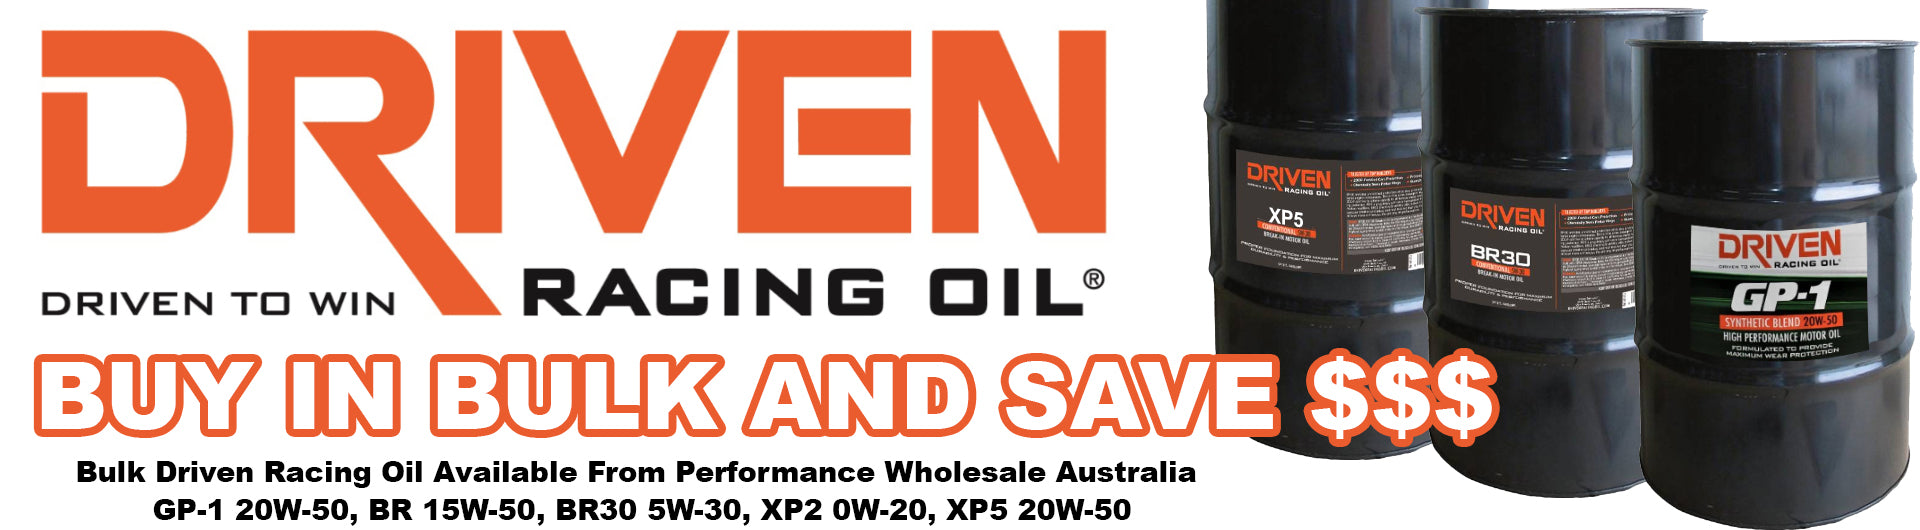 Buy Driven Racing Oils in bulk and save, available from Performance Wholesale Australia